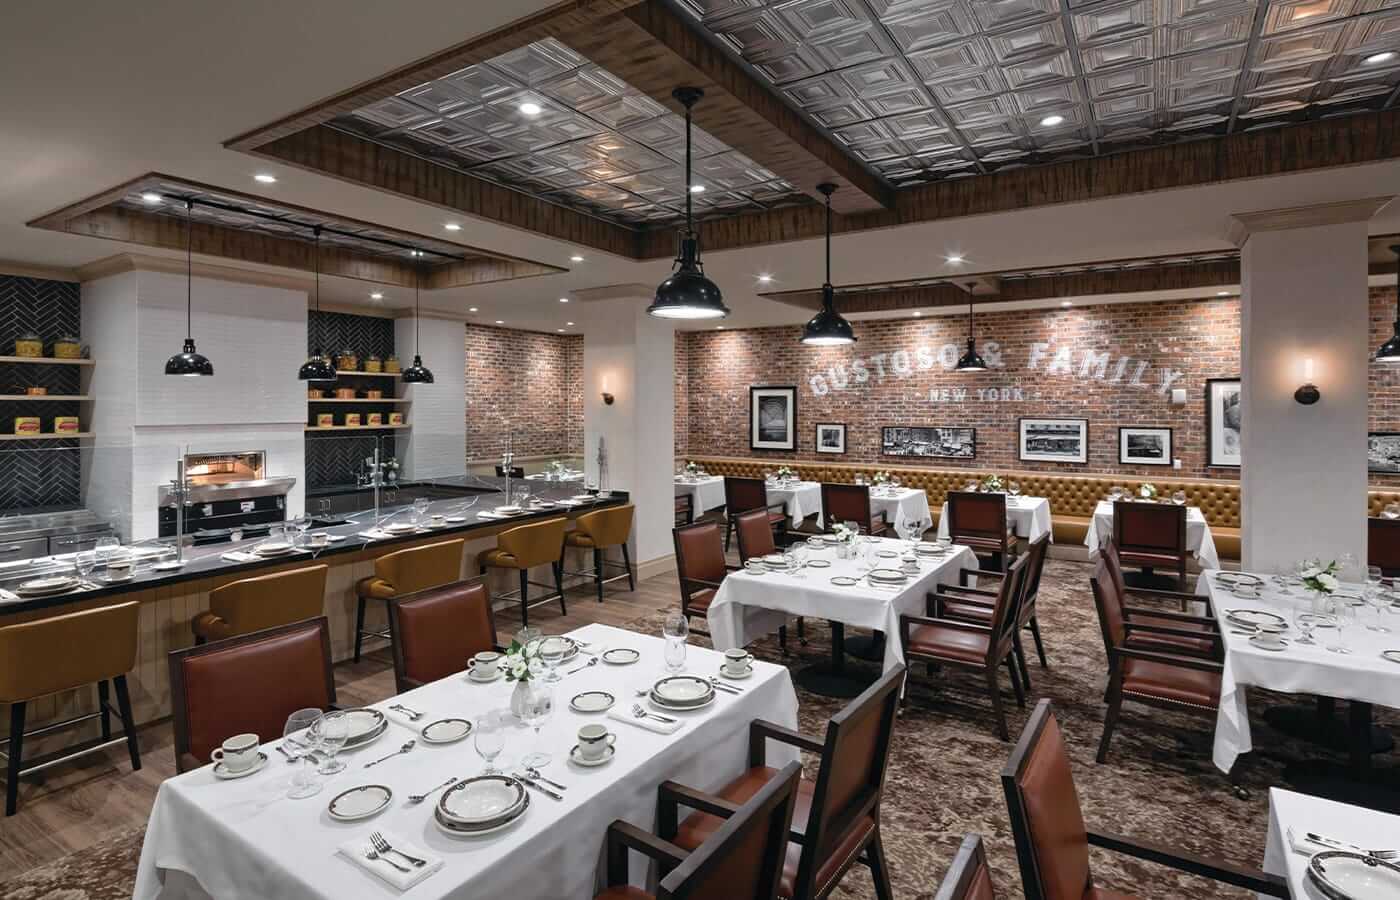 A look inside the Mediterranean style restaurant found on-site at The Watermark at Brooklyn Heights.